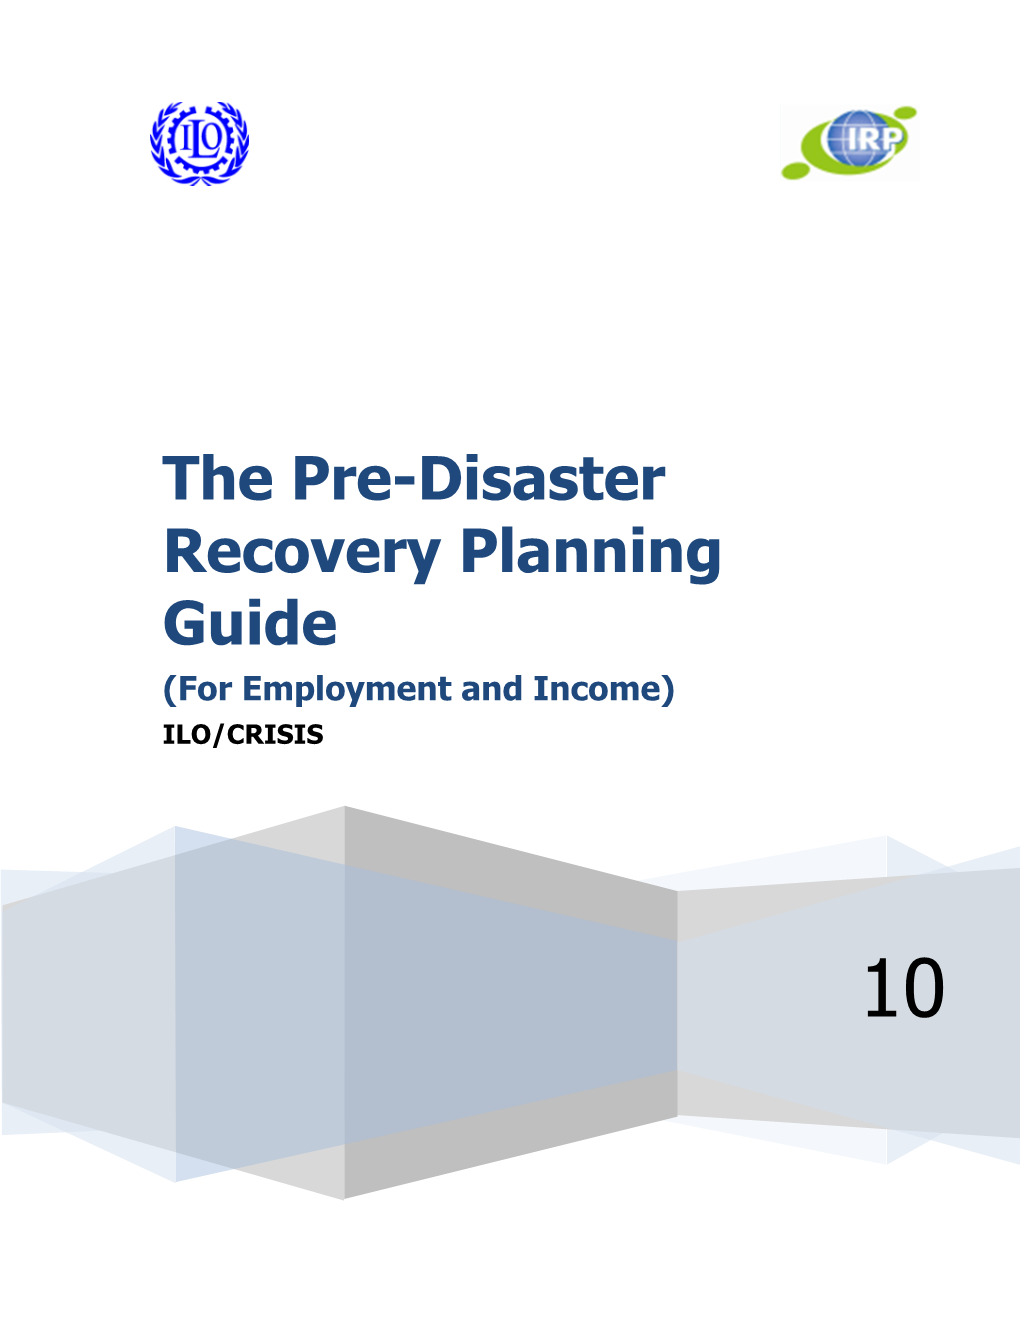 The Pre-Disaster Recovery Planning Guide (Employment and Income)